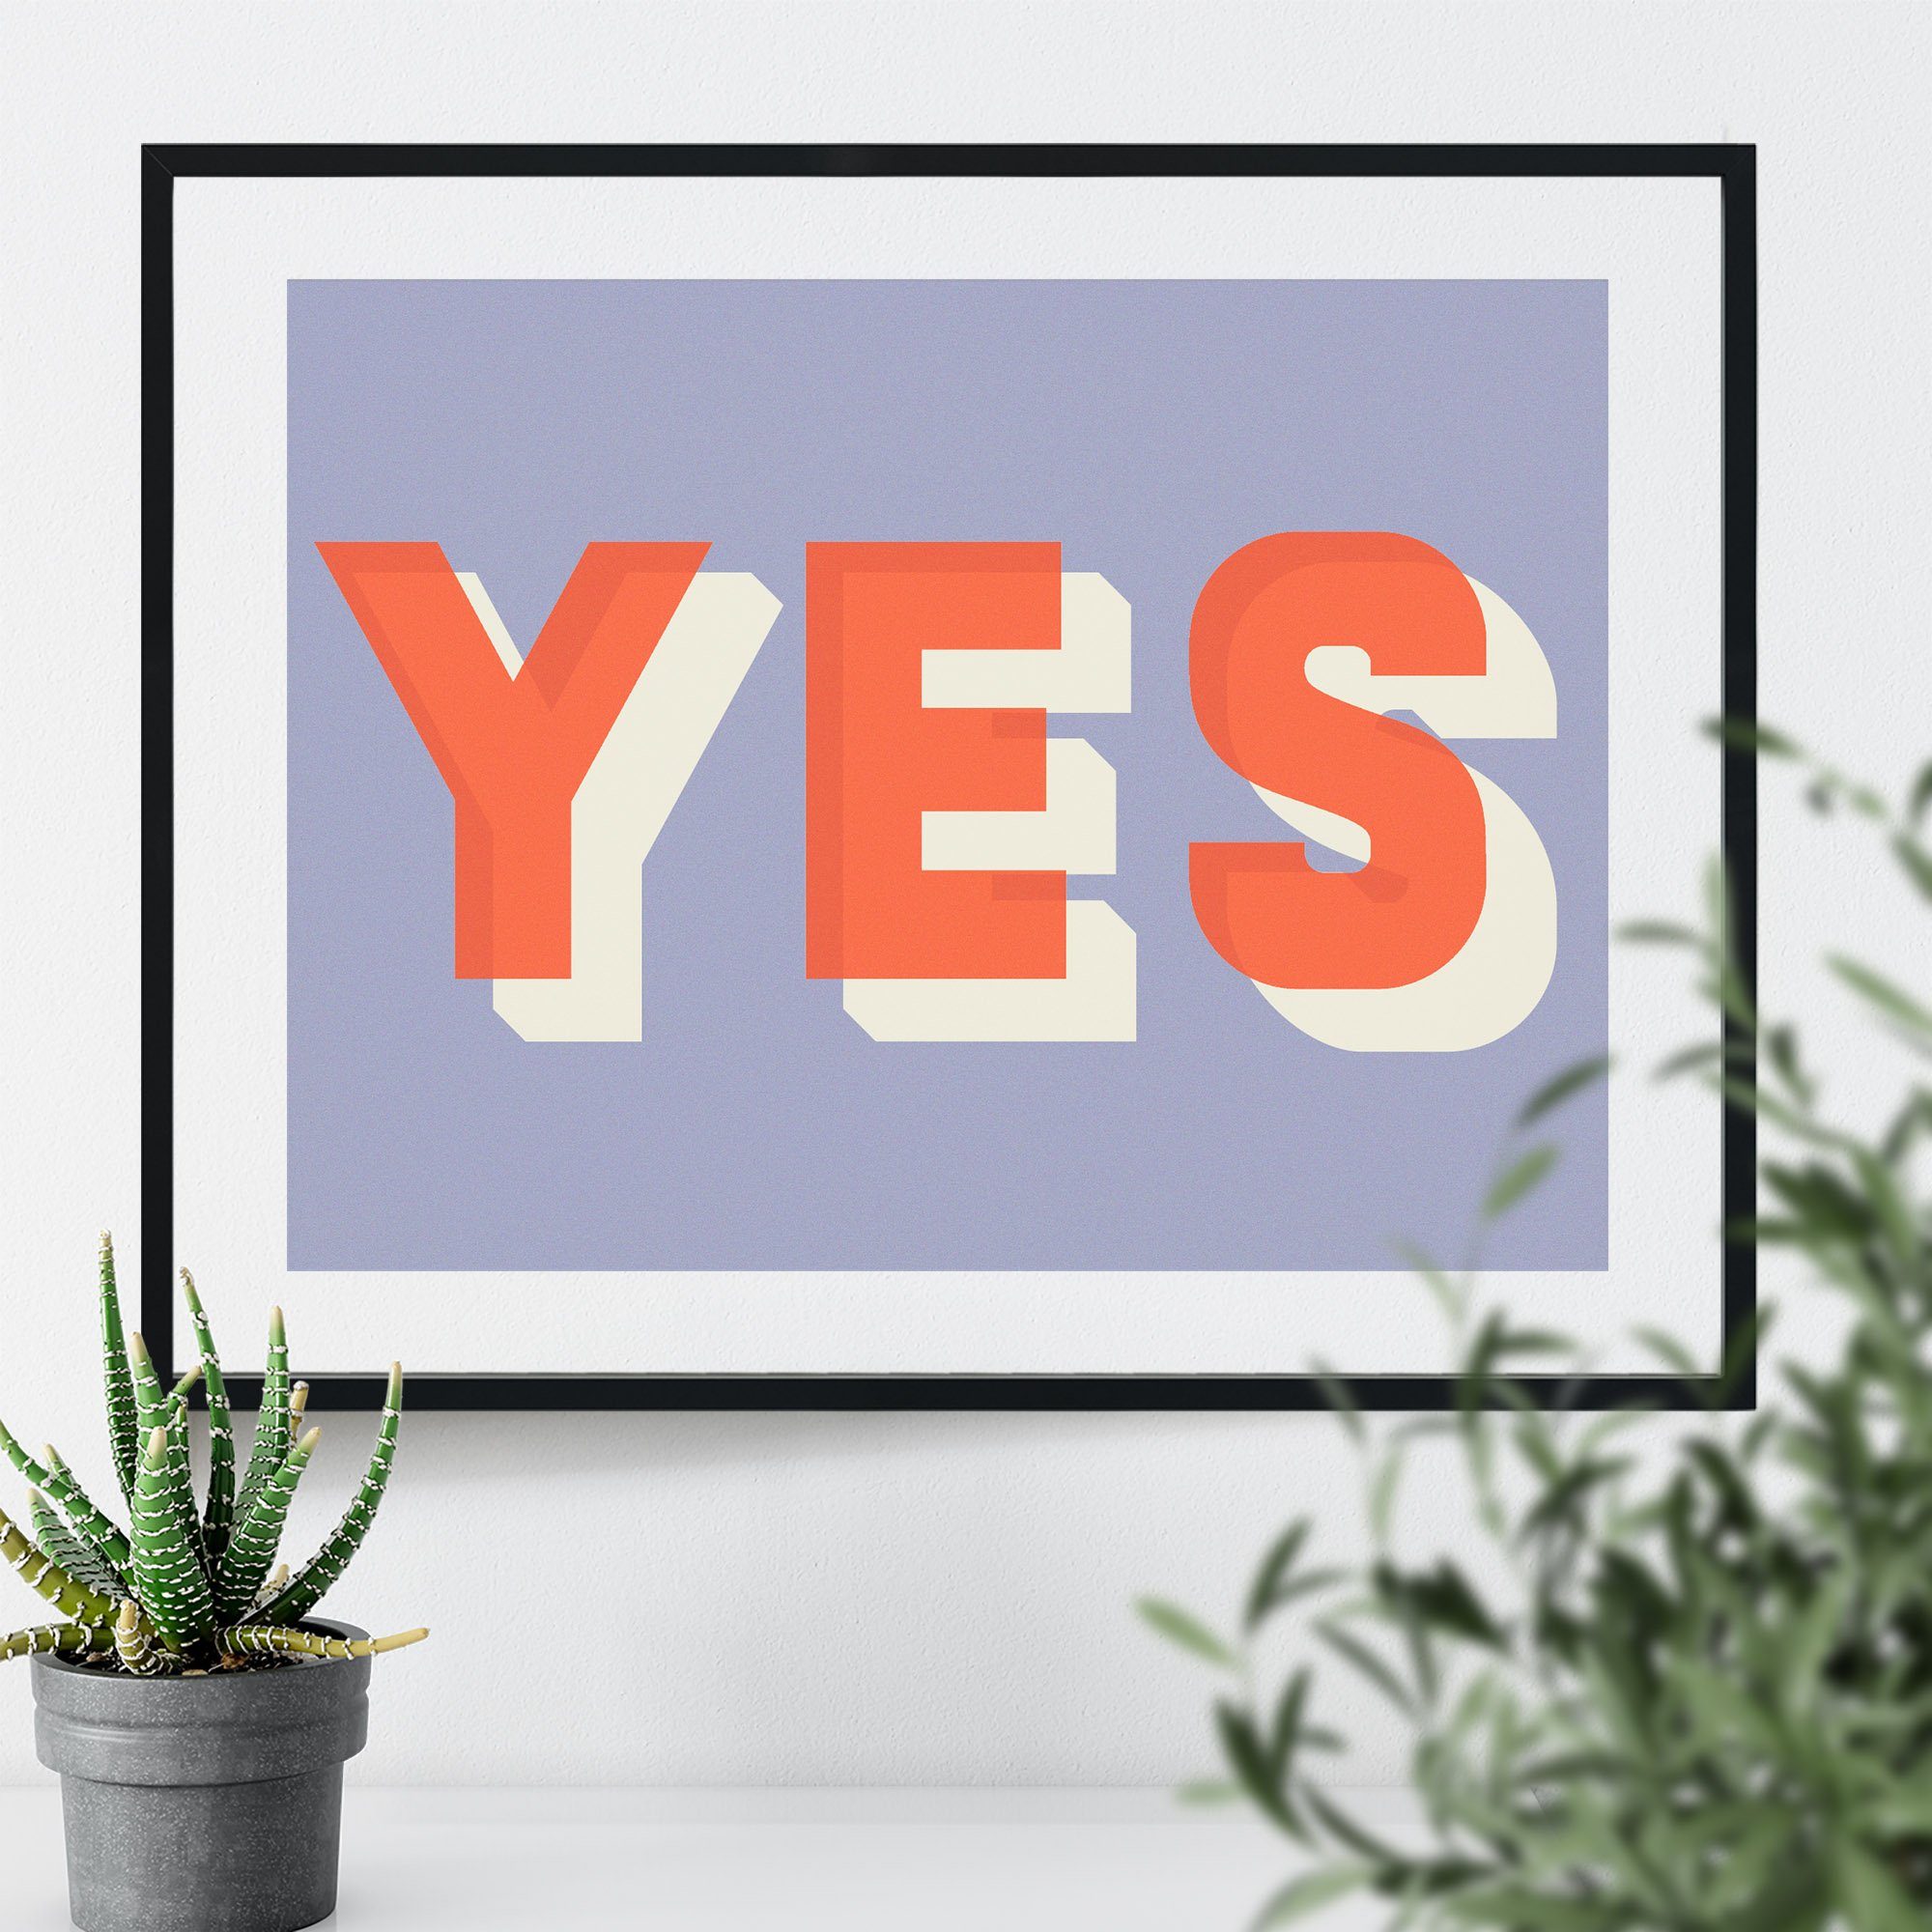 Print with the word YES in large orange text